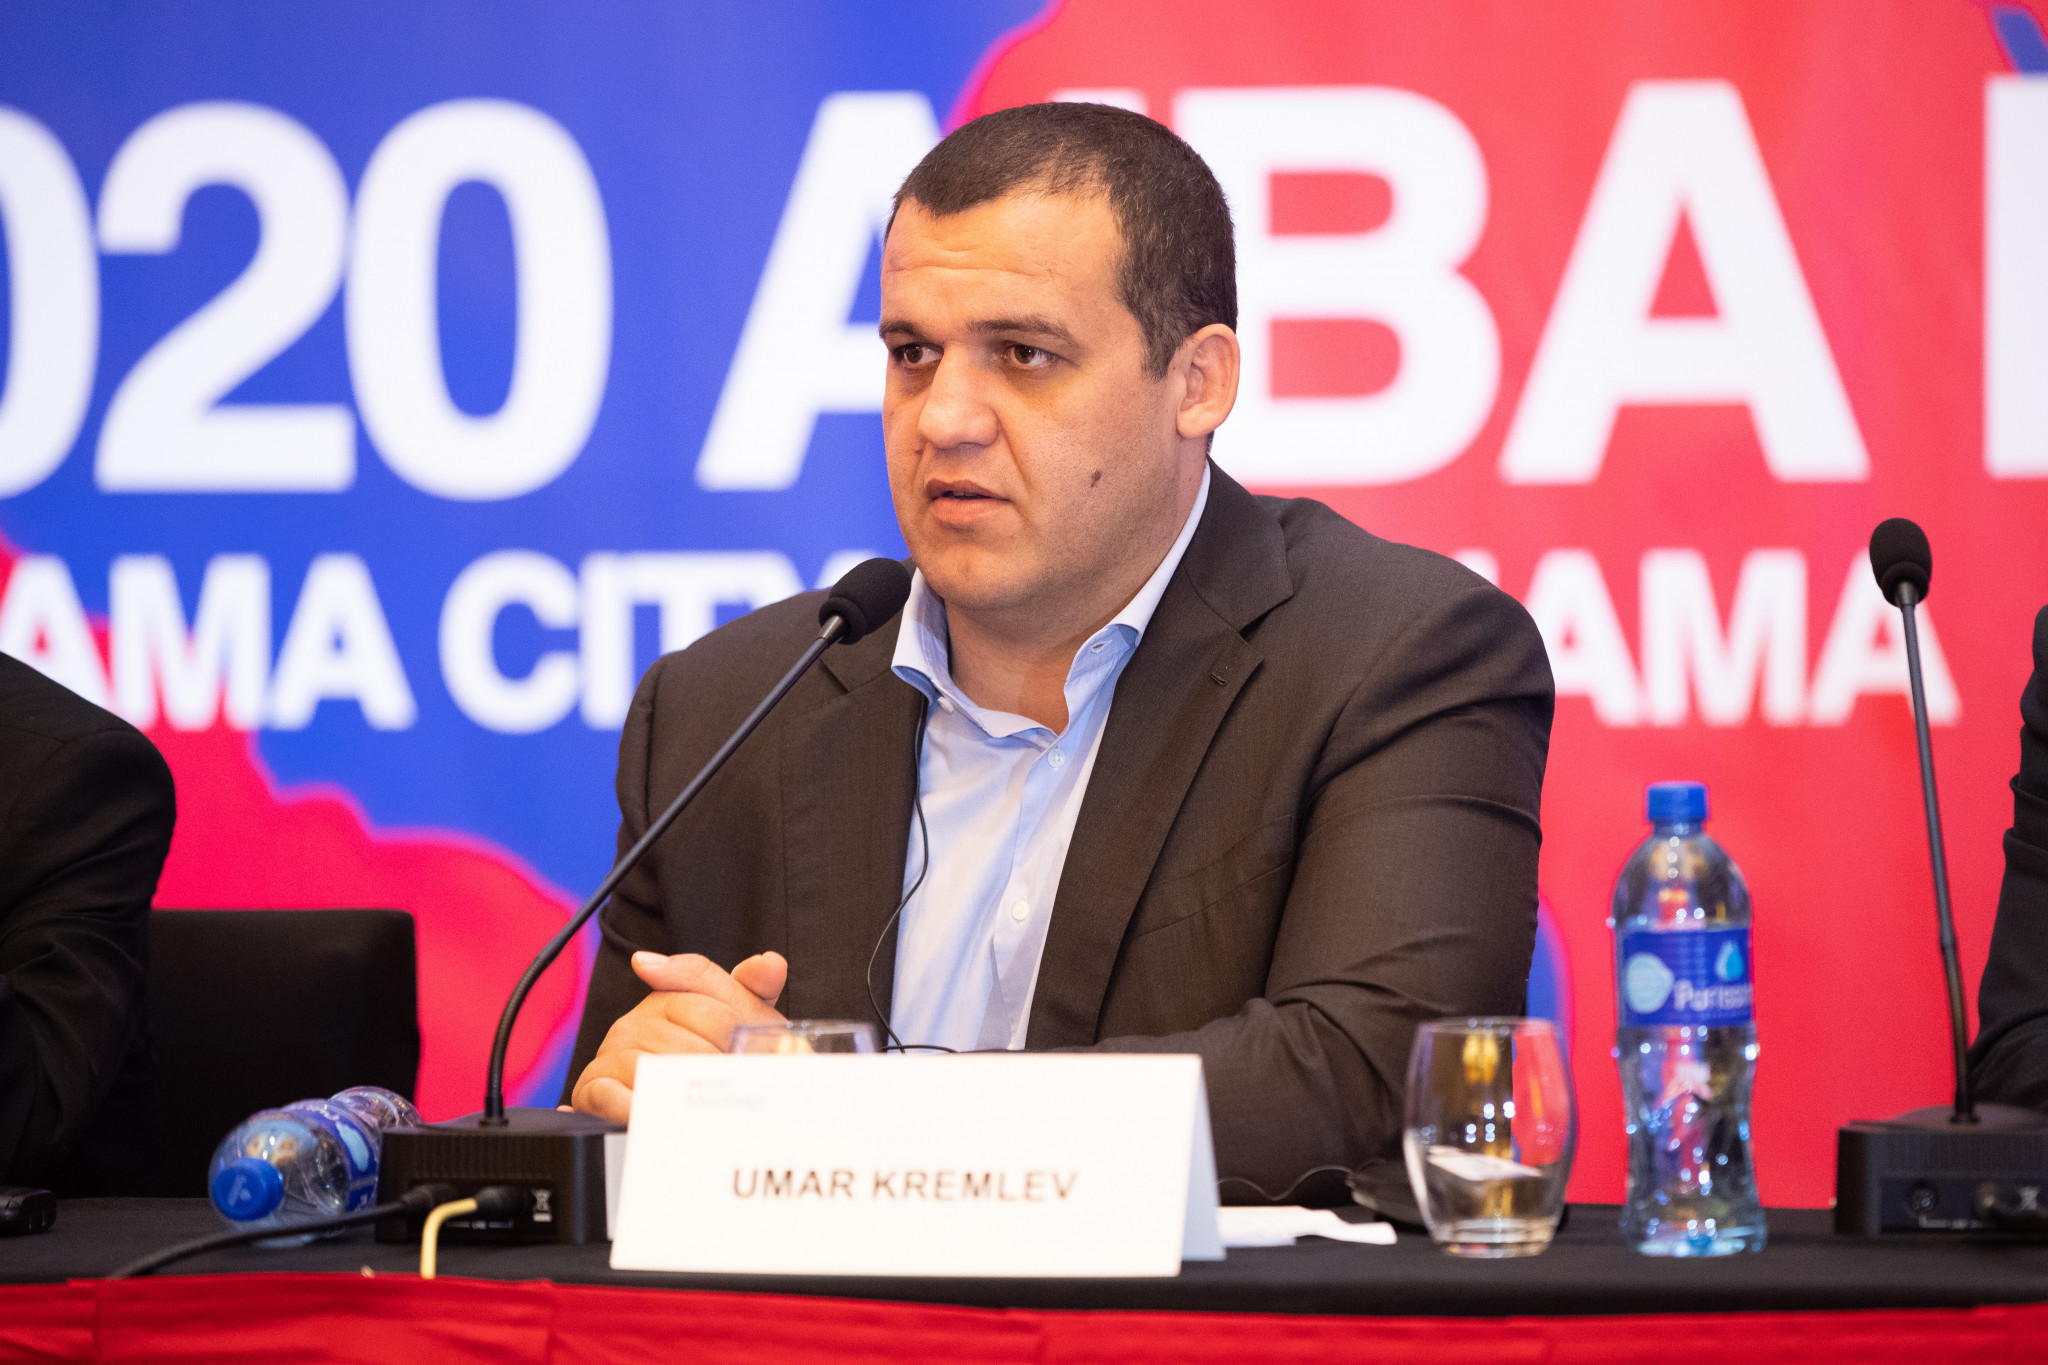 AIBA President Umar Kremlev stressed the importance of carrying out an "honest" and "transparent" investigation into the conduct of judging and refereeing at Rio 2016 ©AIBA